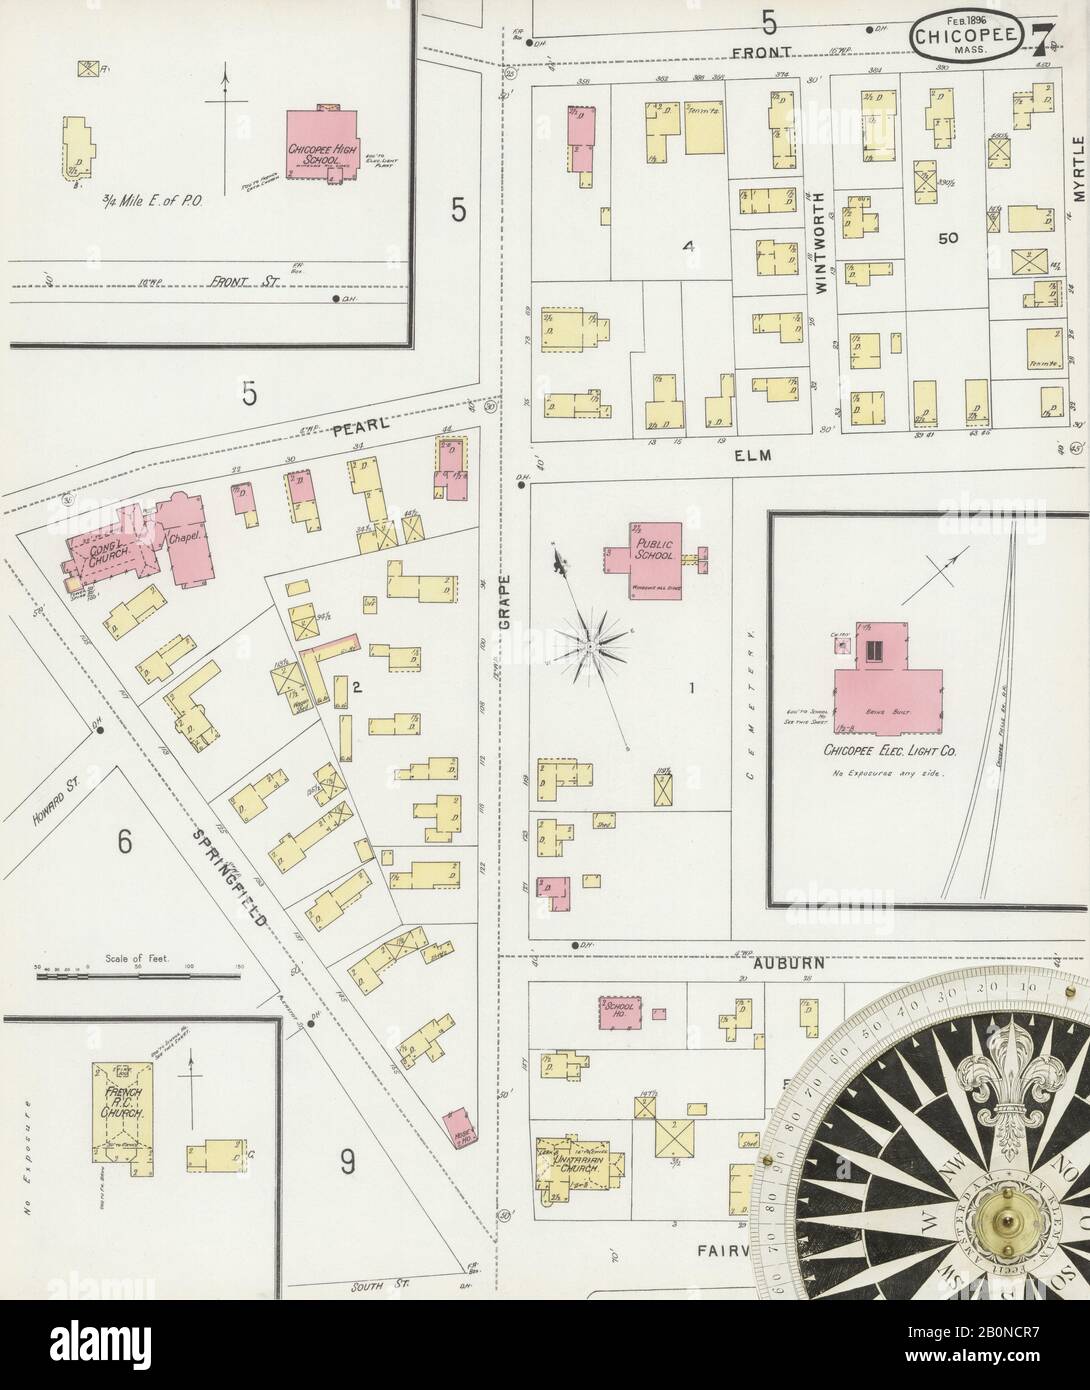 Image 7 of Sanborn Fire Insurance Map from Chicopee, Hampden County, Massachusetts. Feb 1896. 16 Sheet(s). Includes Chicopee Falls, America, street map with a Nineteenth Century compass Stock Photo